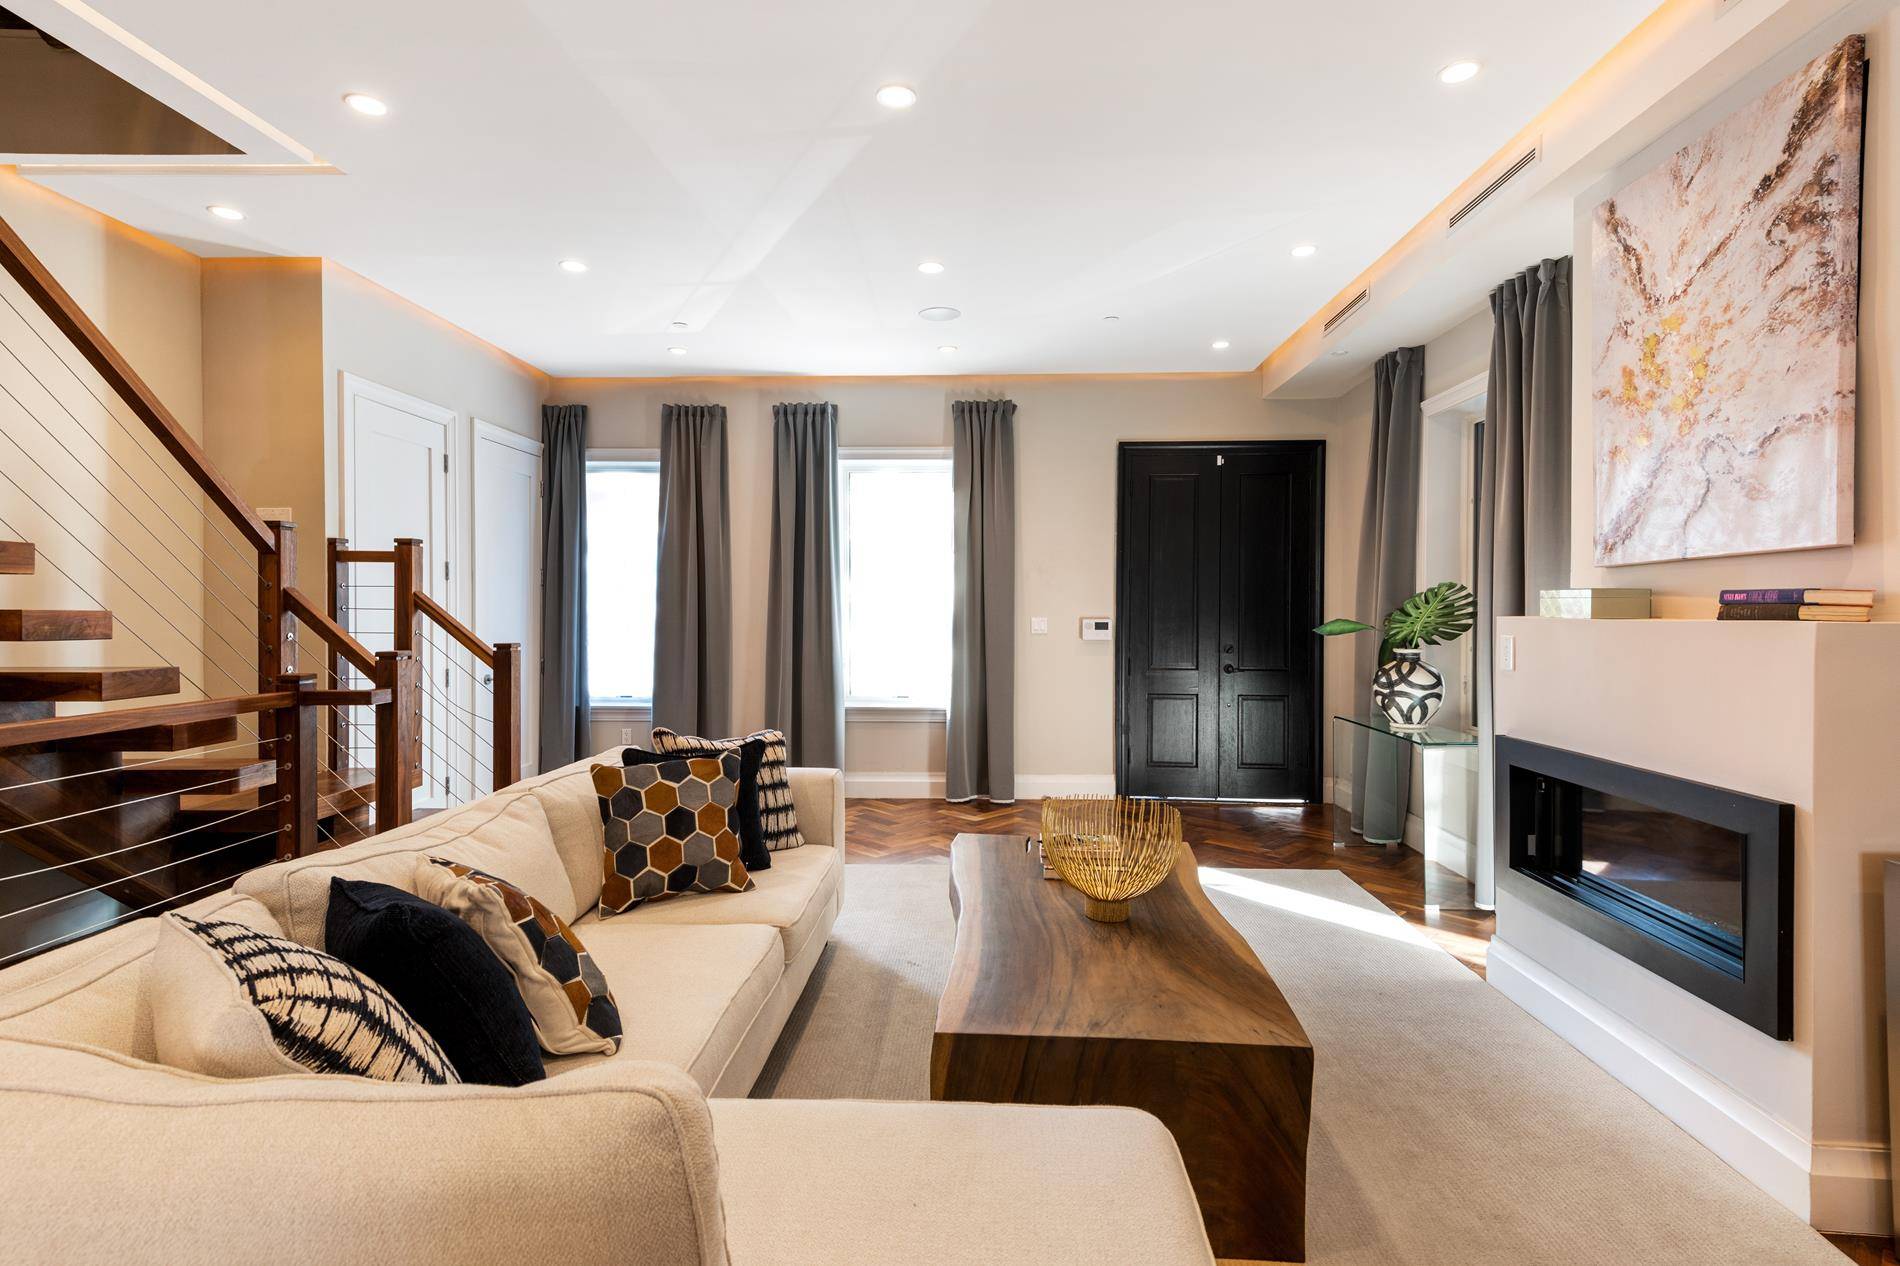 This impeccably designed single family home is located in the greatly sought after, yet rarely available, neighborhood of Vinegar Hill, Brooklyn.